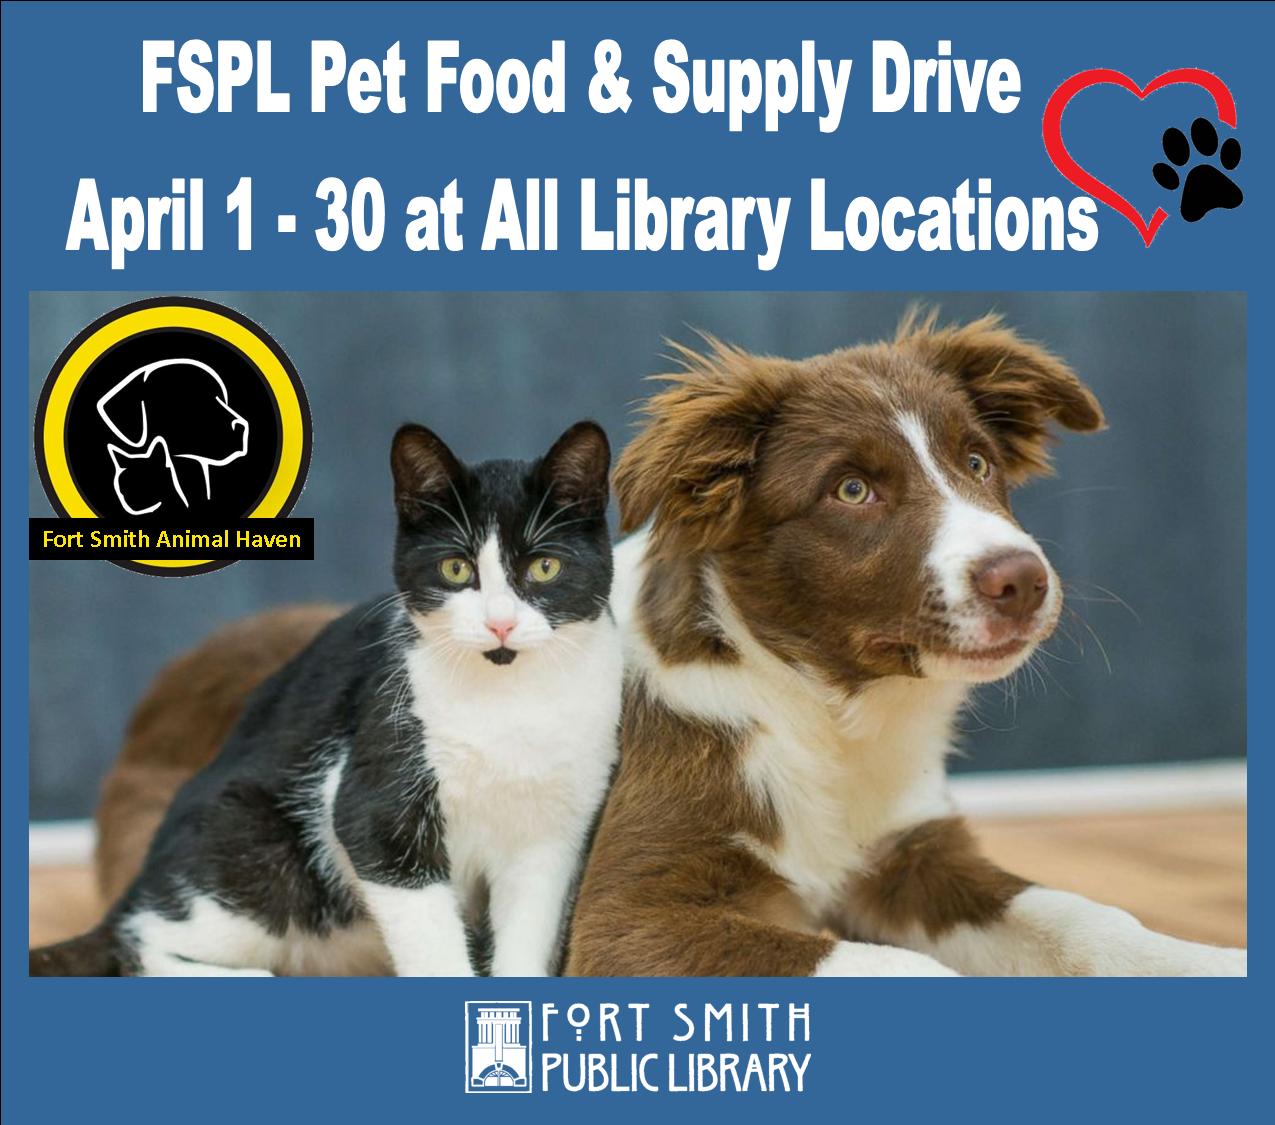 black and white cat and brown and white dog on sign for pet food and supply drive